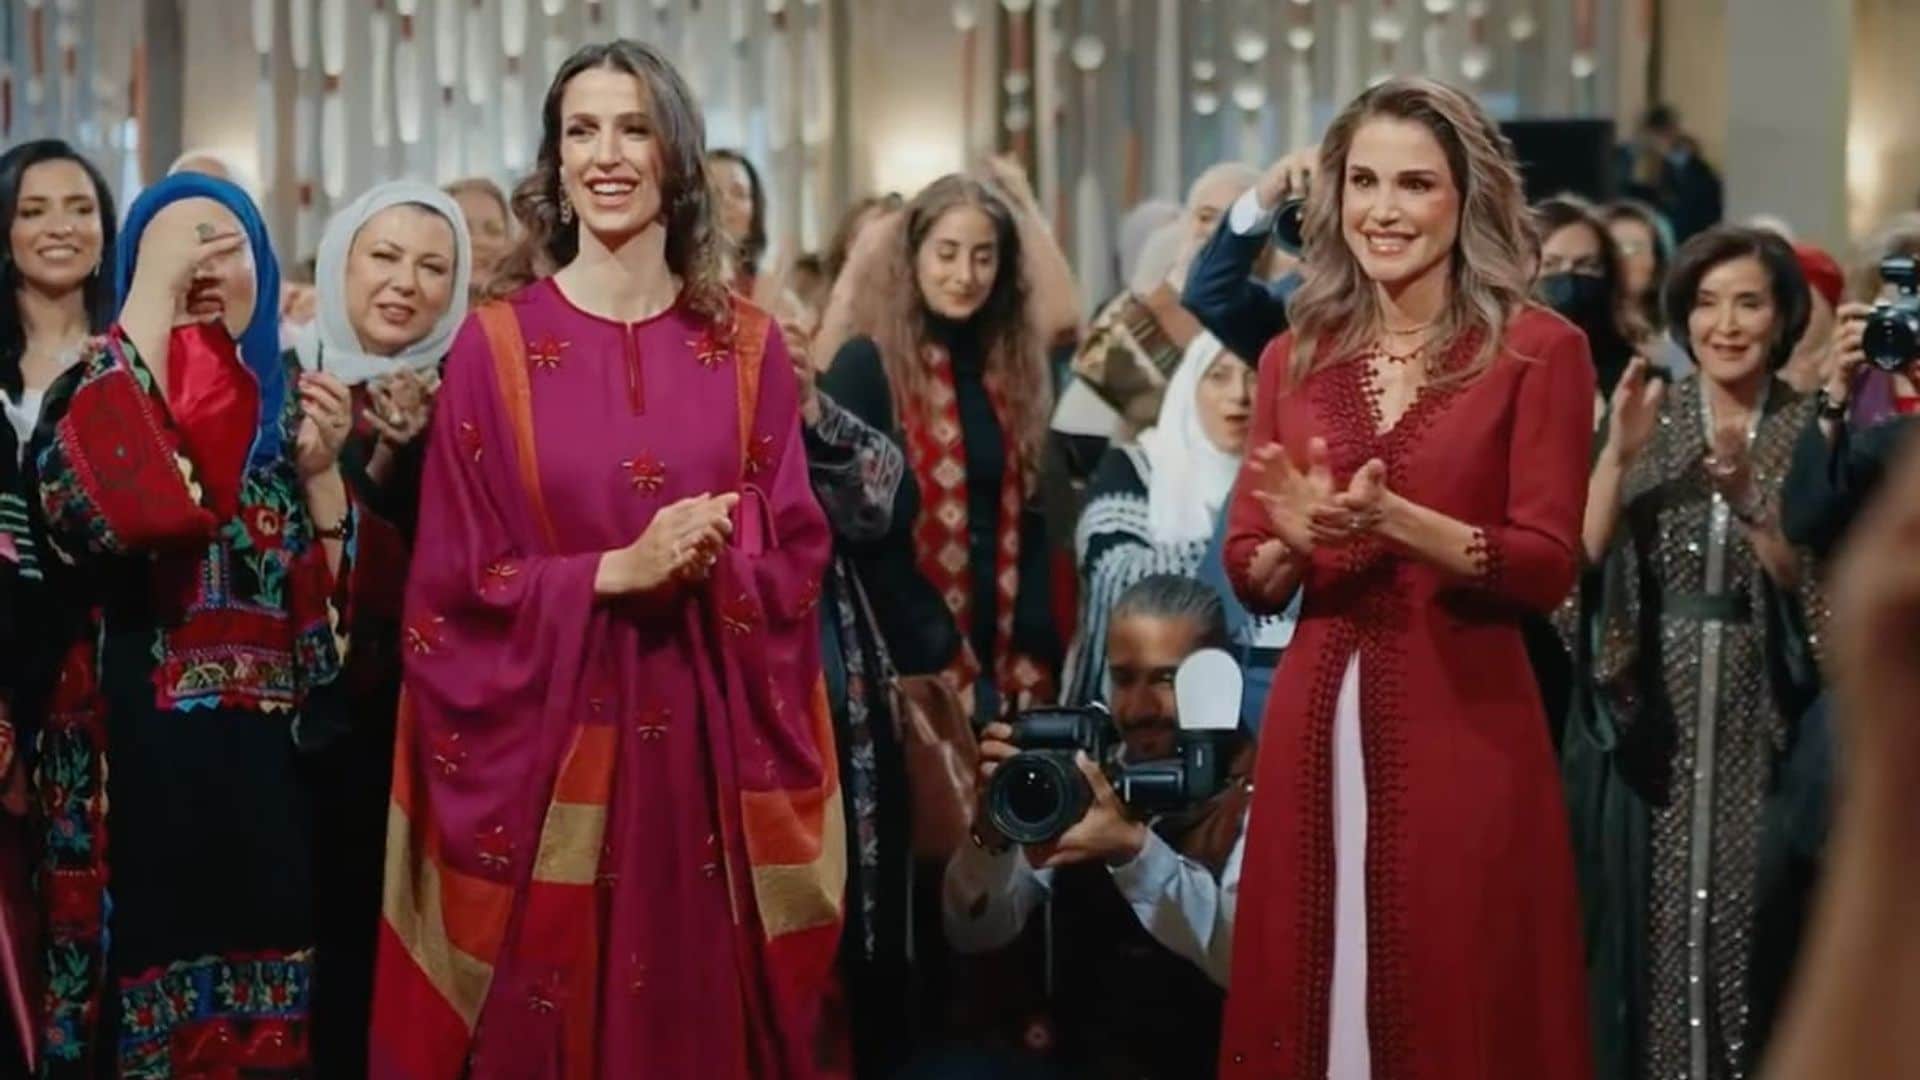 Queen Rania’s future daughter-in-law joins Jordanian royals at party